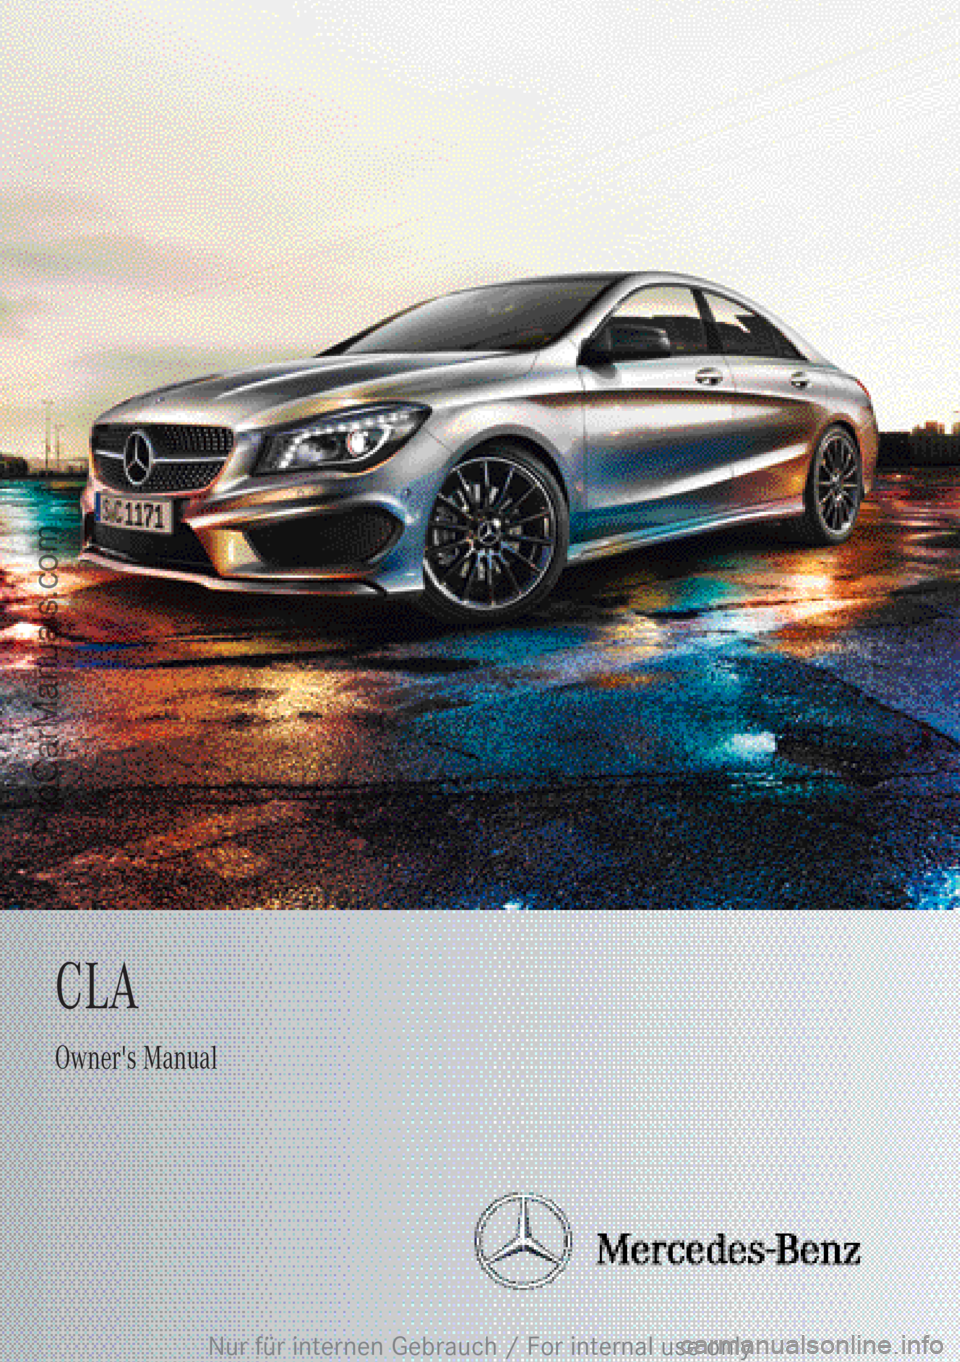 MERCEDES-BENZ CLA-CLASS 2013  Owners Manual CLAOwner's Manual
Nur für internen Gebrauch / For internal use only
ProCarManuals.com 